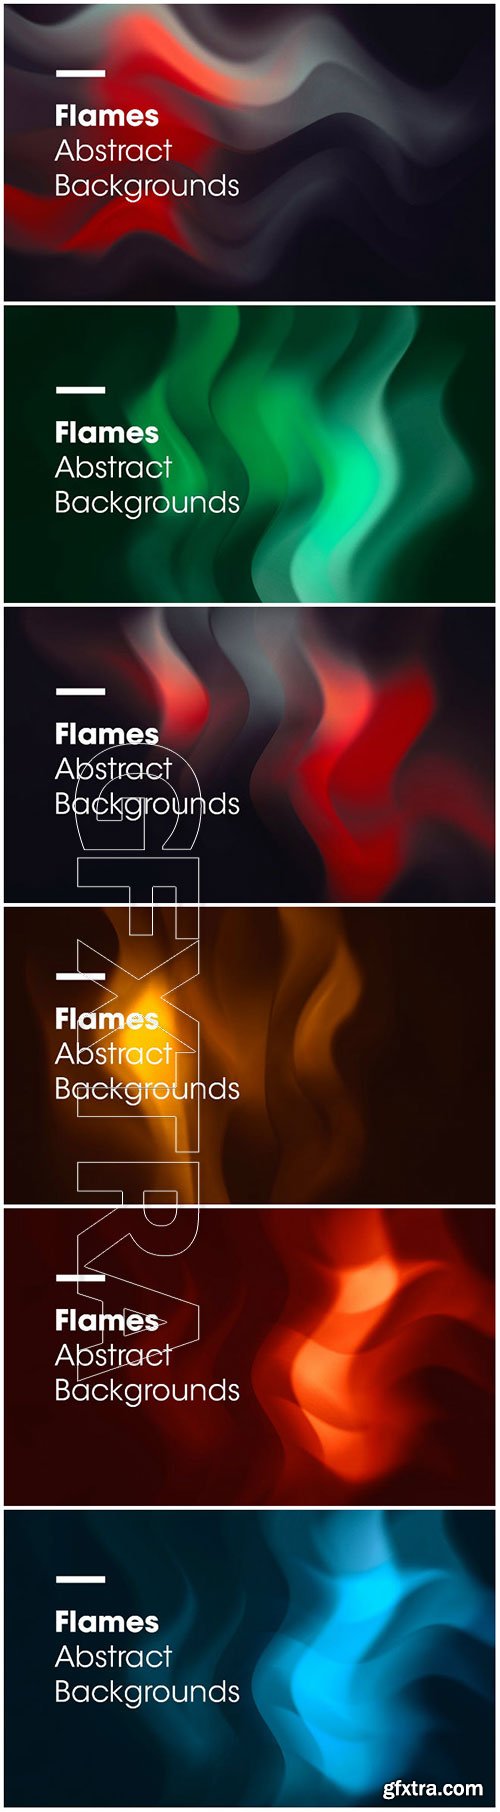 Flames Abstract Backgrounds